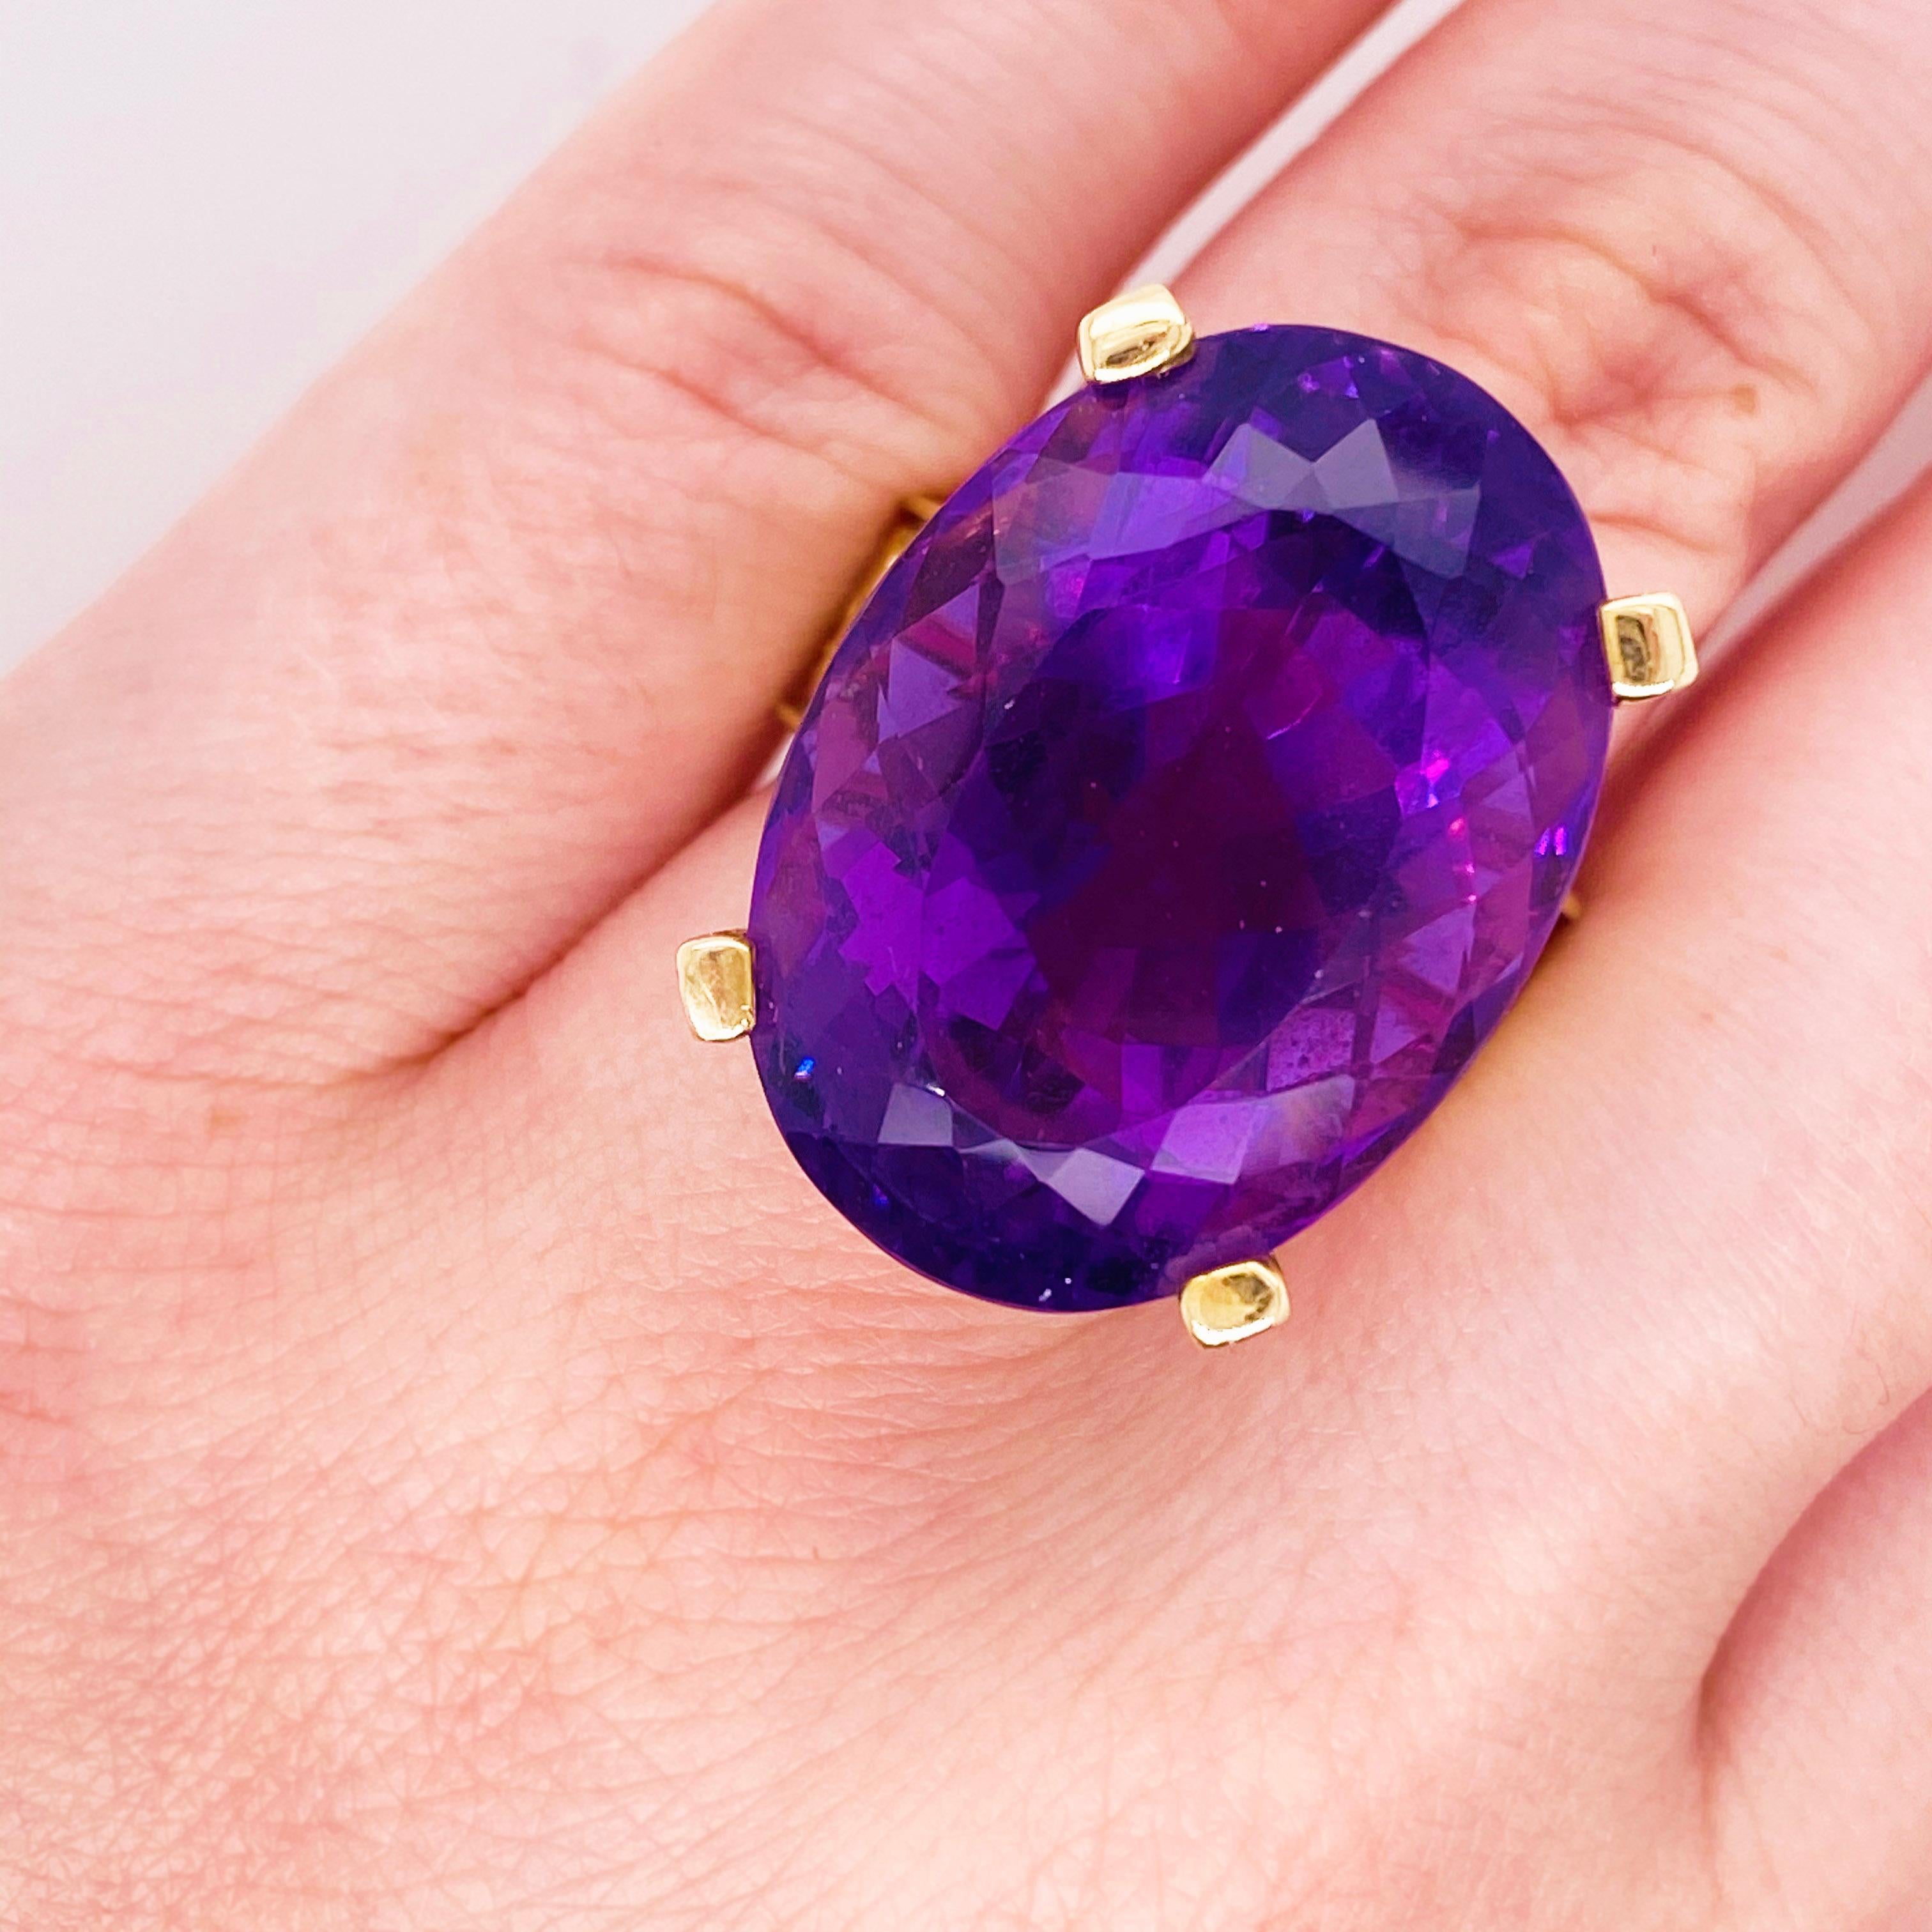 This stunningly beautiful 36 carat oval amethyst accented with gorgeous diamonds and fleur de lis set in 18kt yellow gold would make anyone thrilled to receive it! This ring provides a huge statement look that is very modern and classic at the same